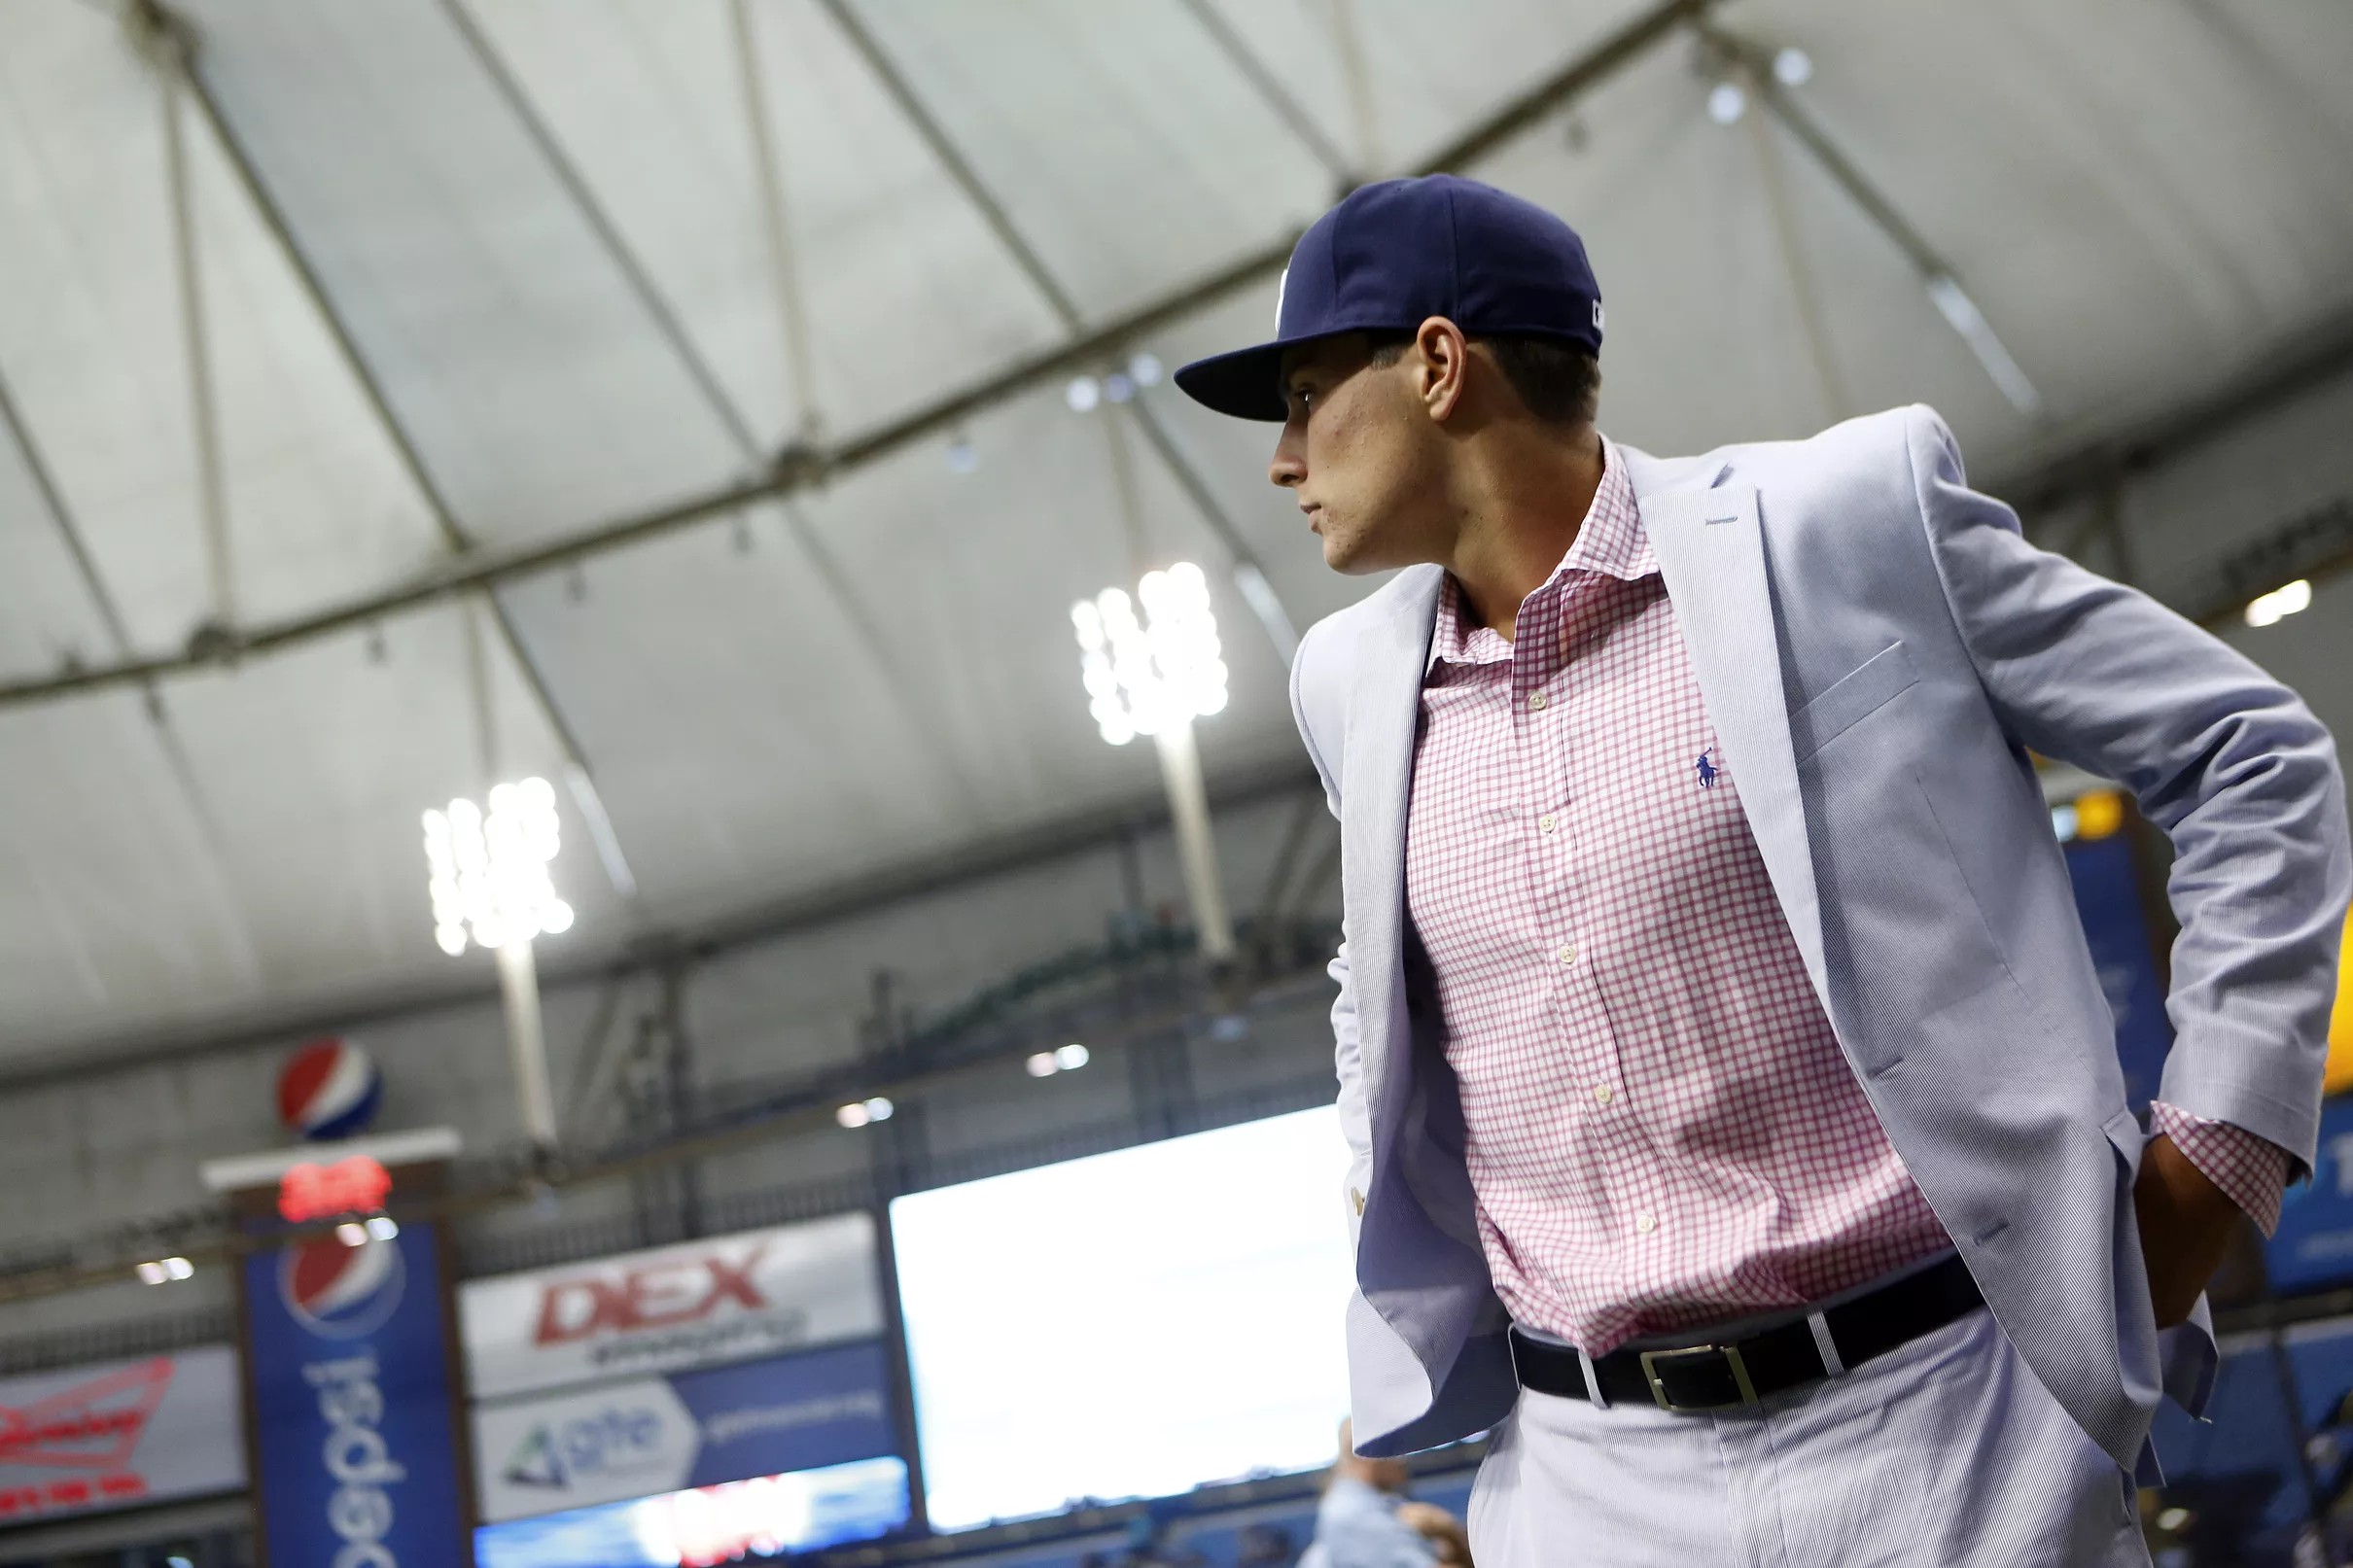 Tampa Bay Rays News and Links Rays assigned 35th overall draft pick in